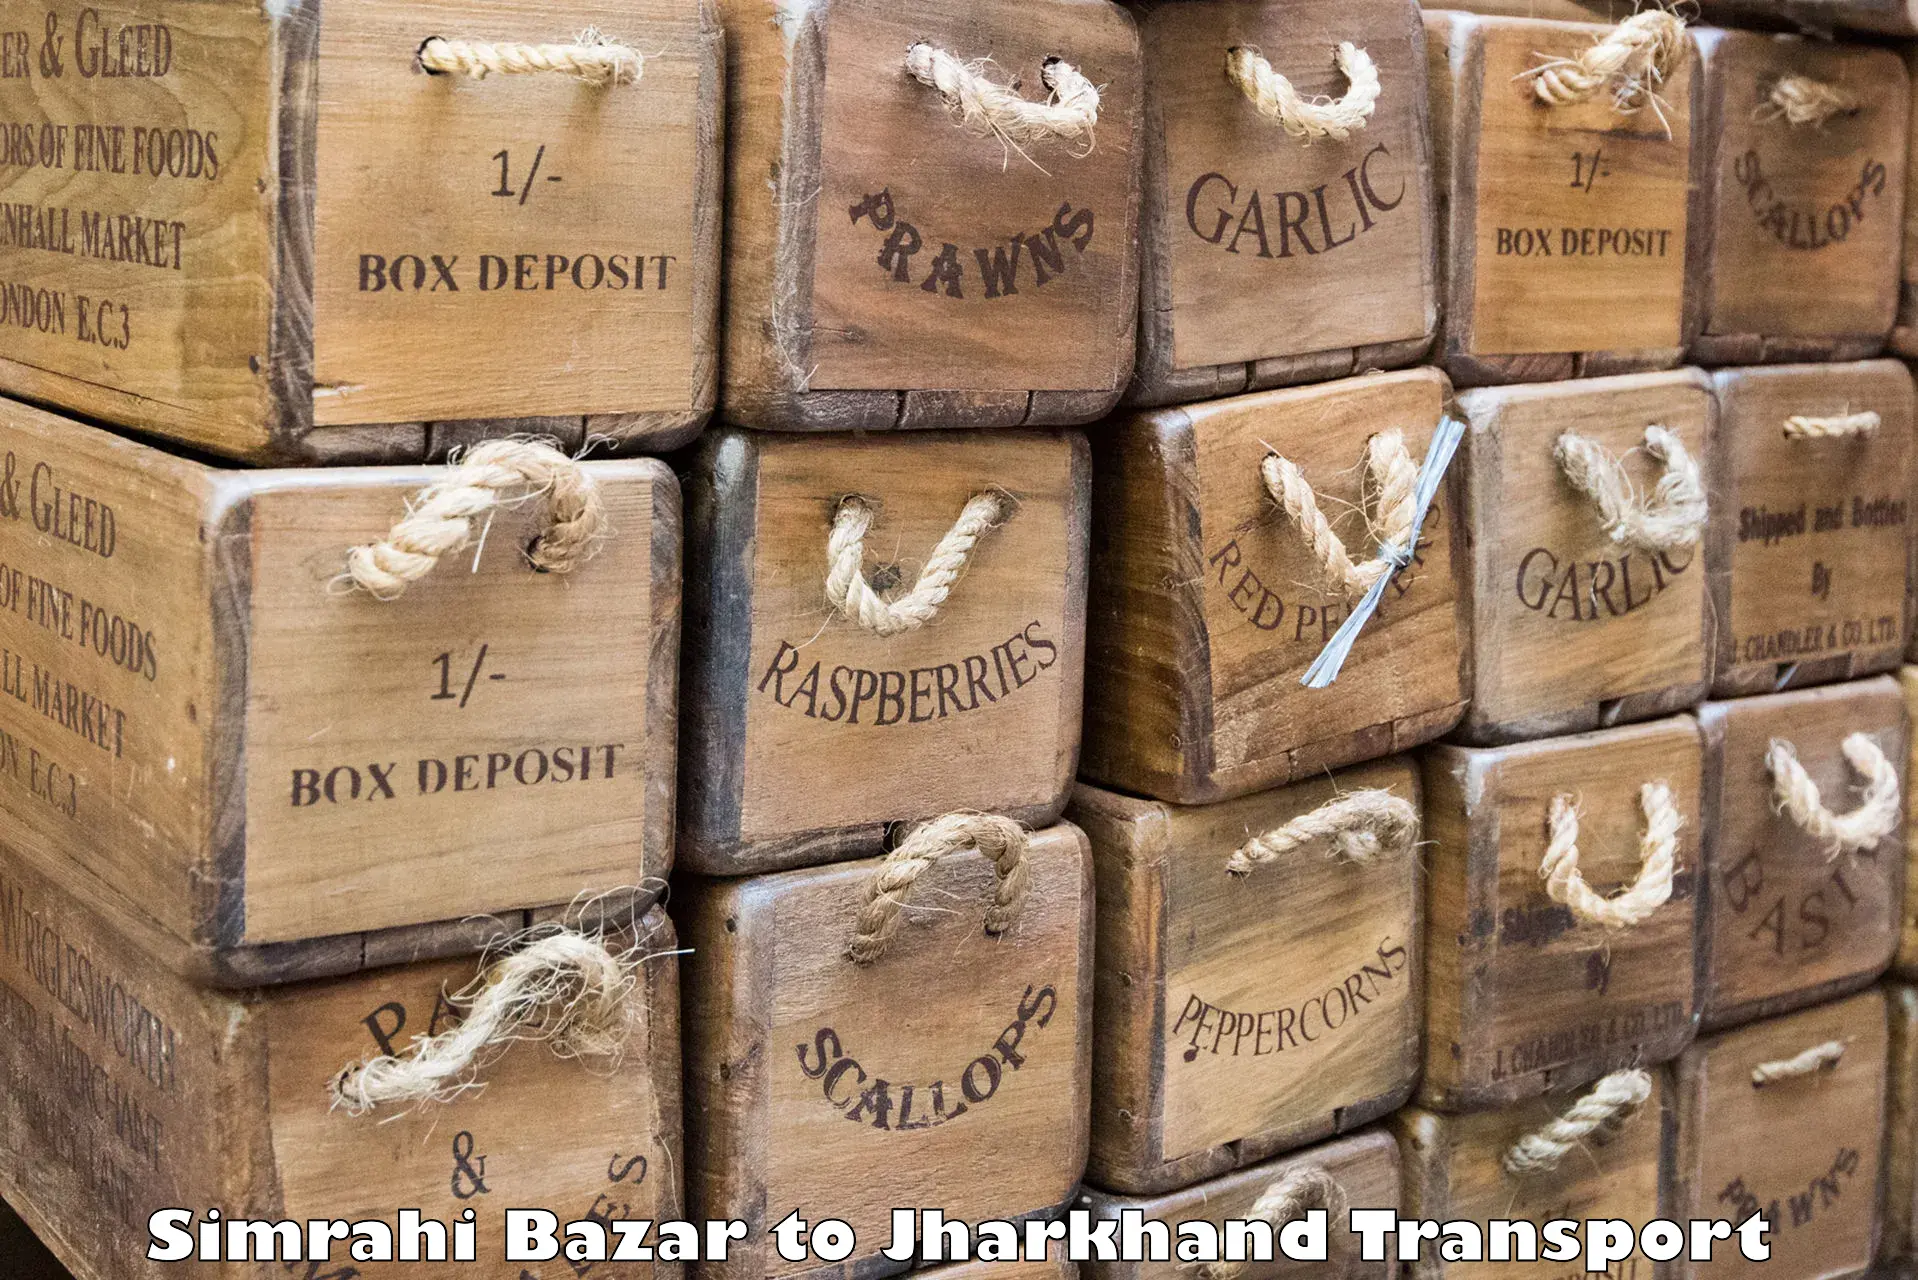 Air freight transport services Simrahi Bazar to Jamshedpur